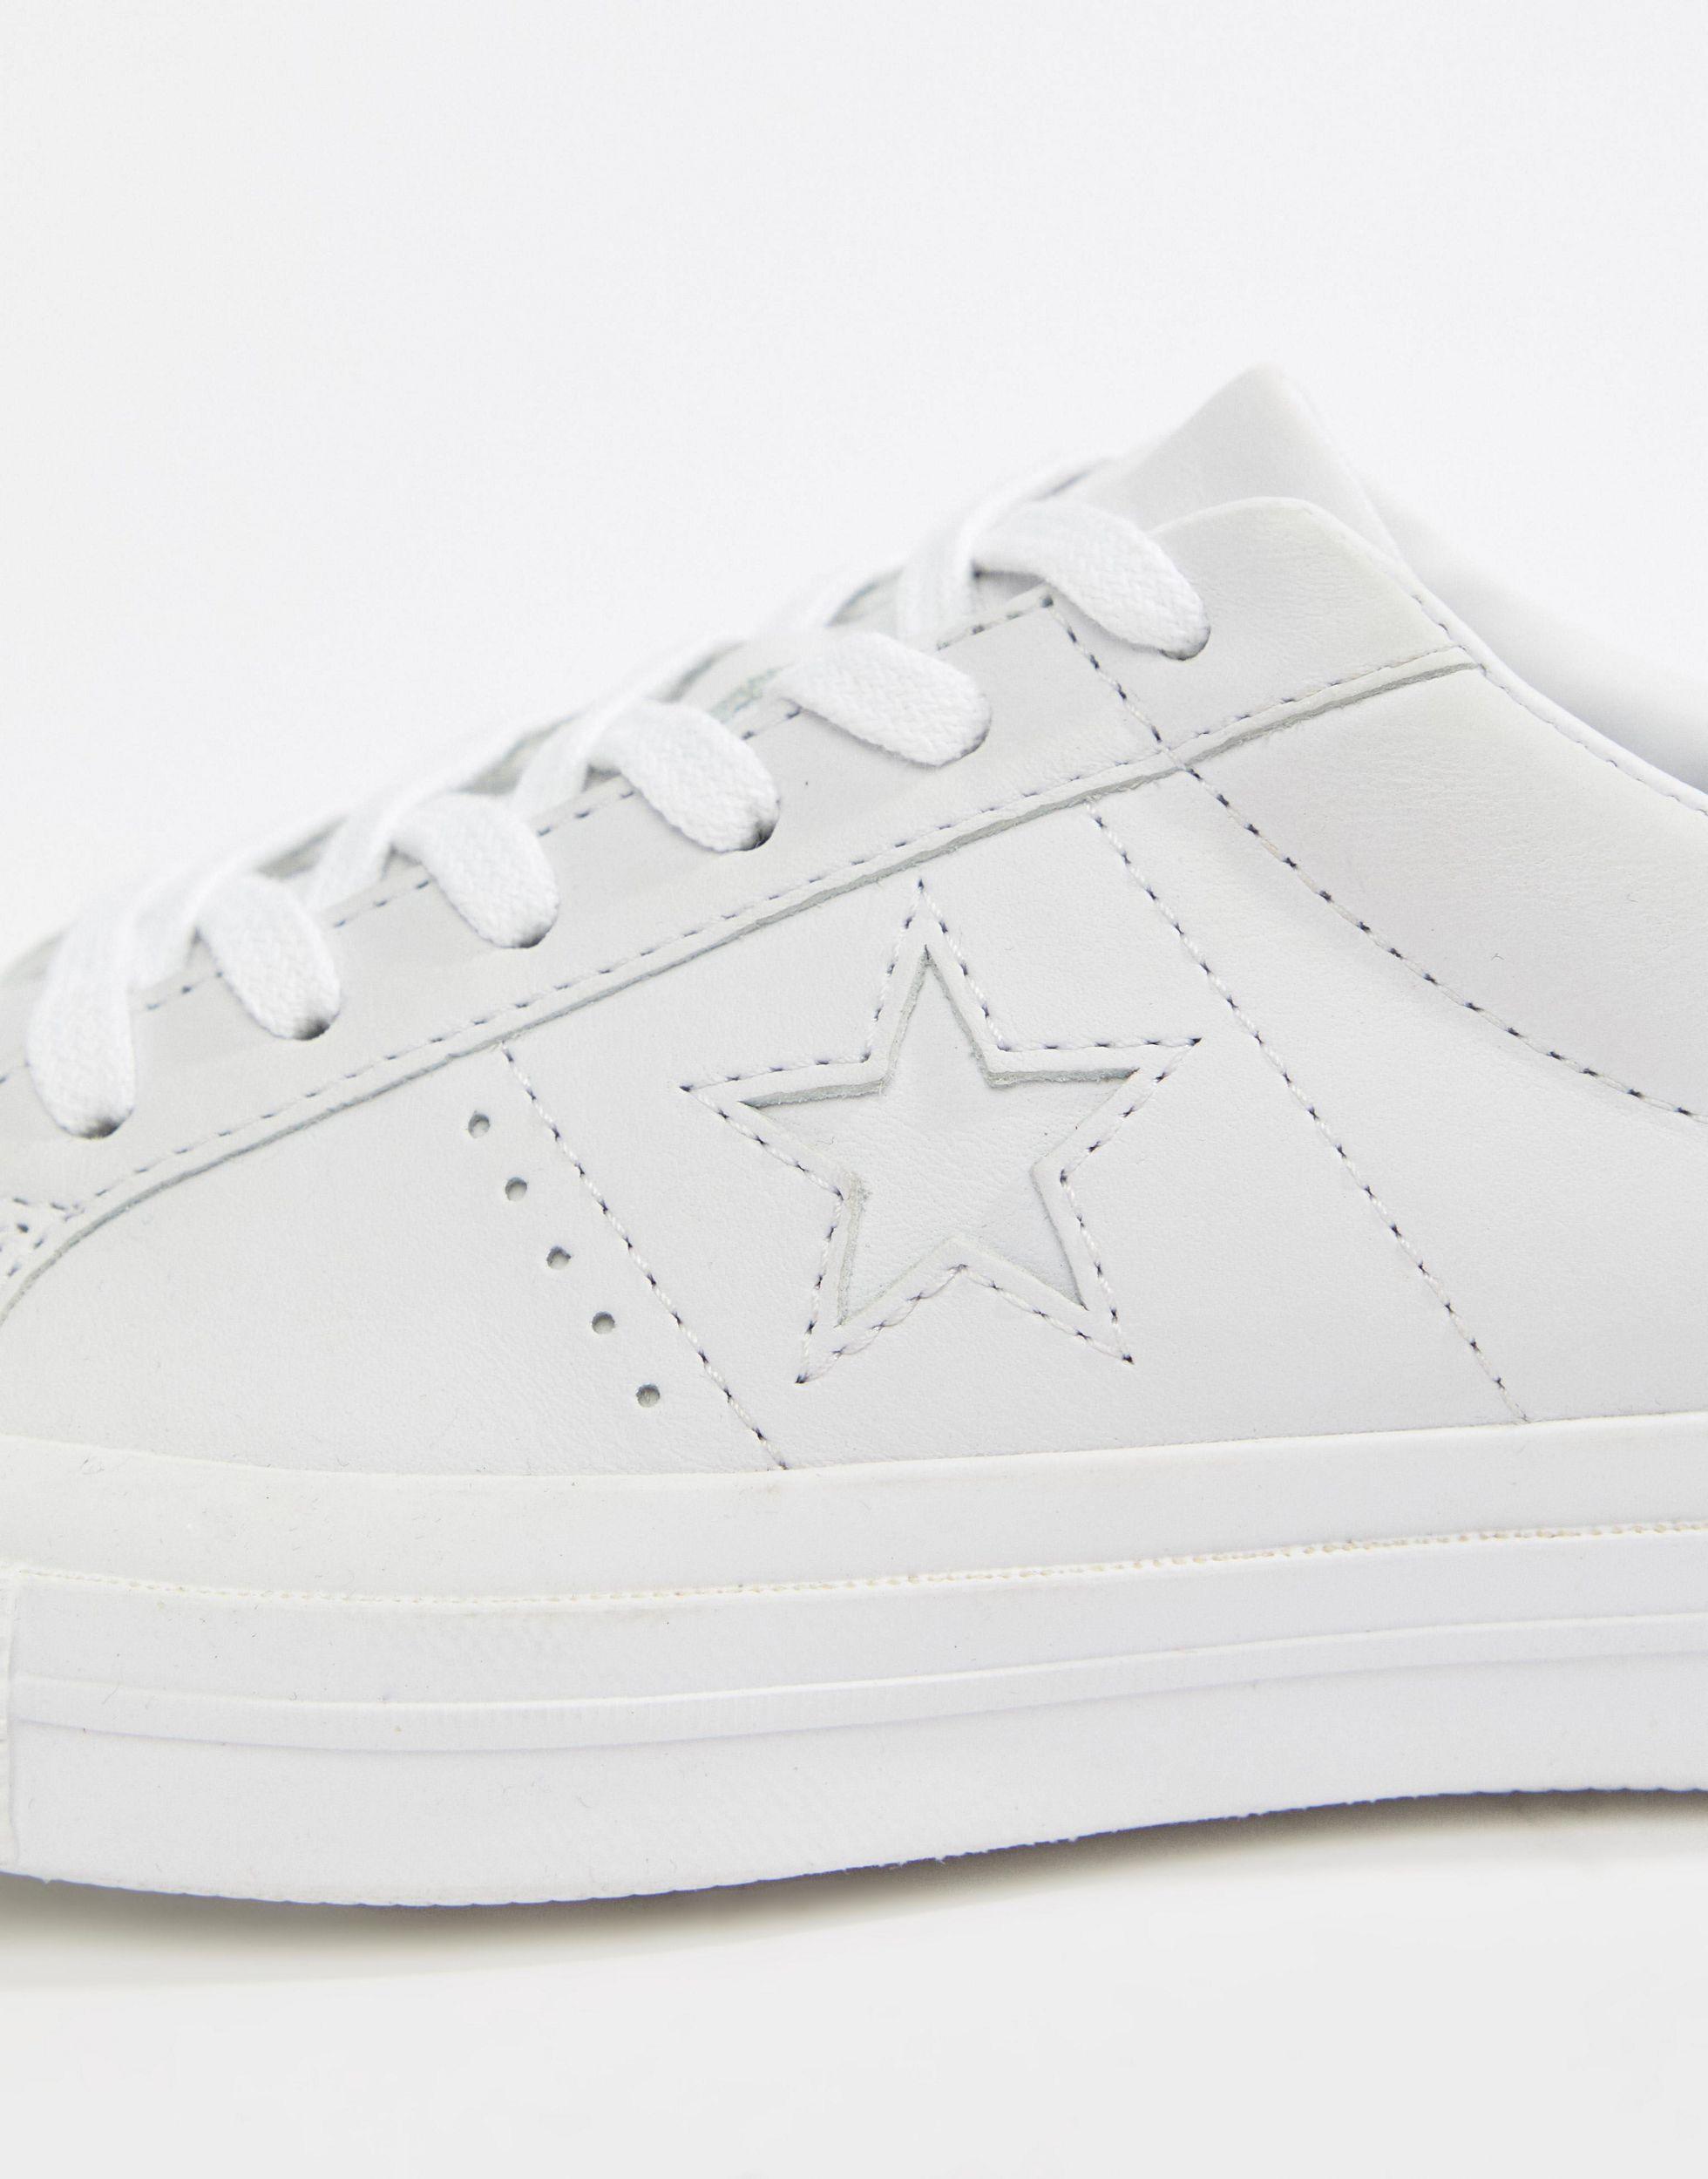 bijgeloof solo Afdeling Converse One Star Triple Leather Sneakers in White | Lyst